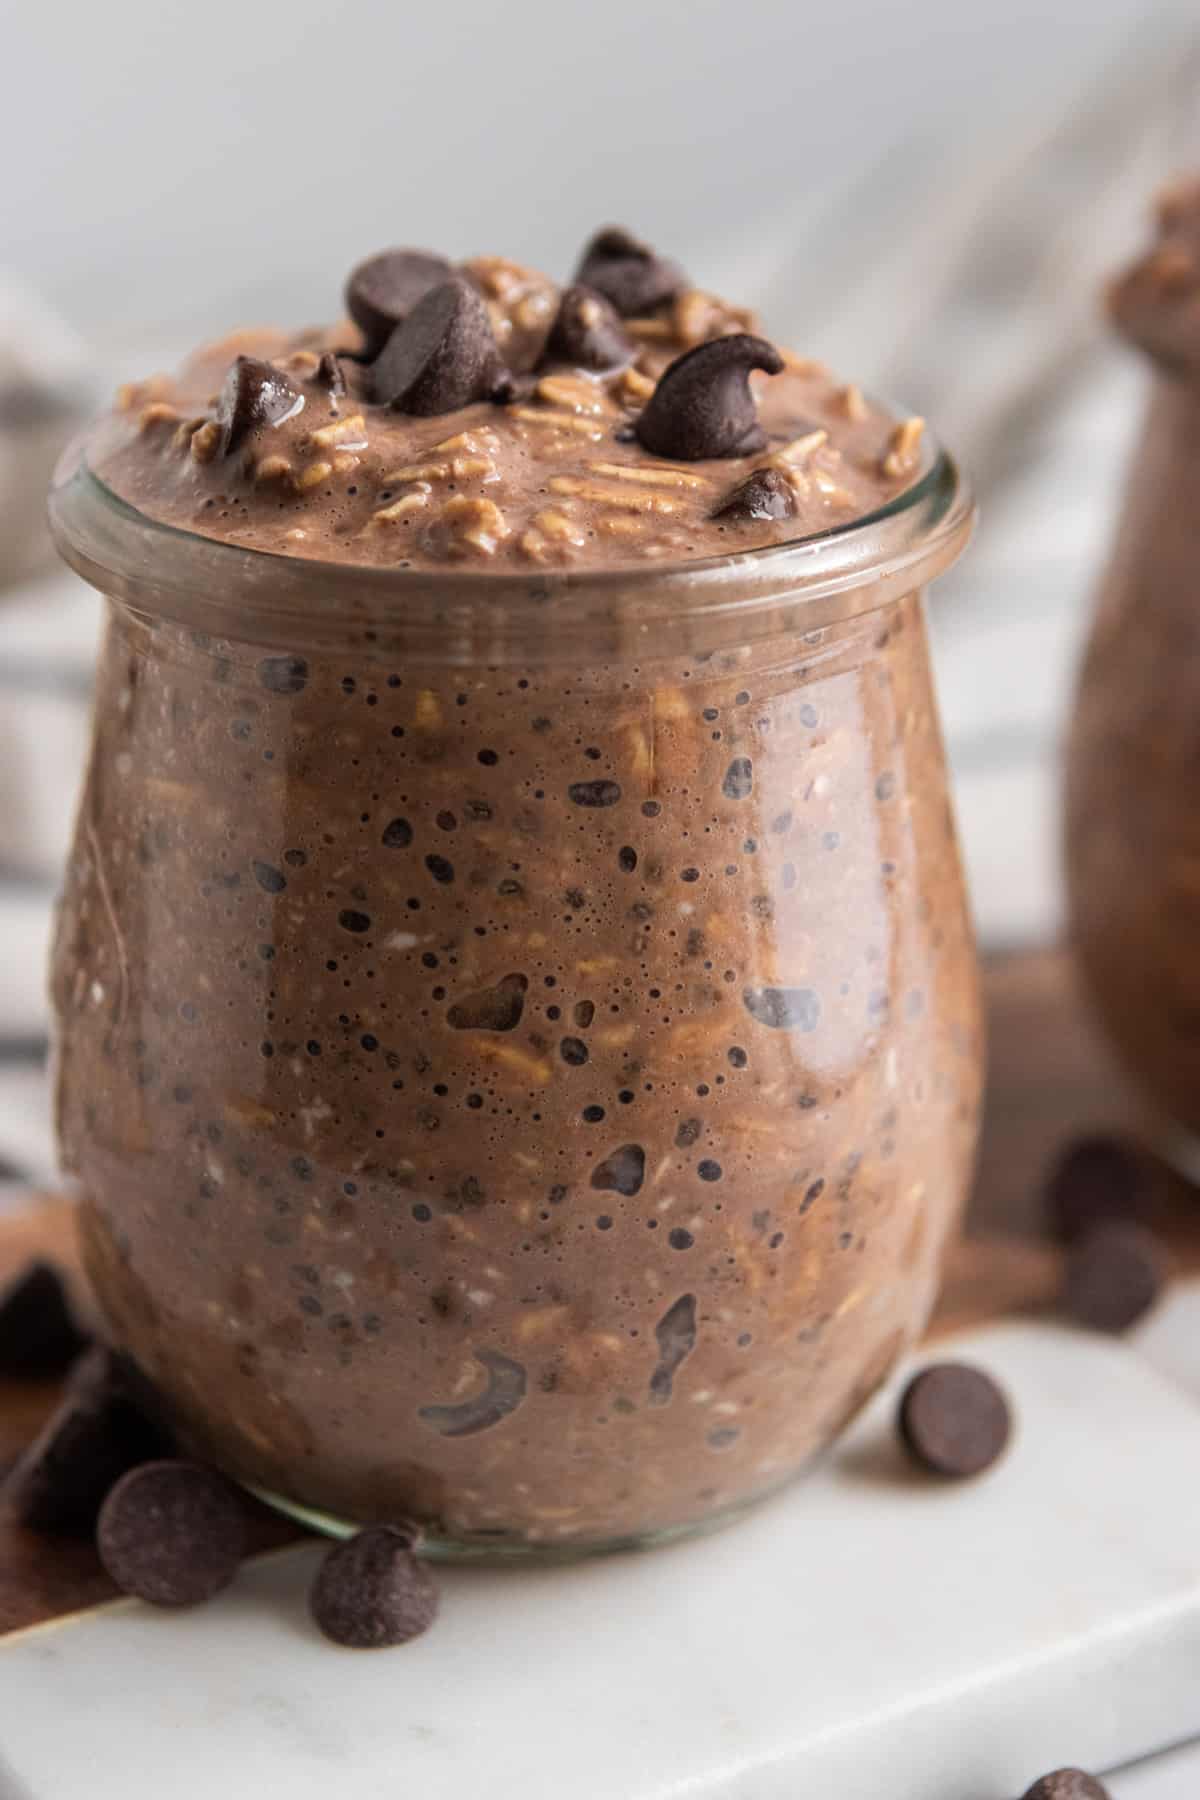 Overnight oatmeal in weck jar with chocolate chips.